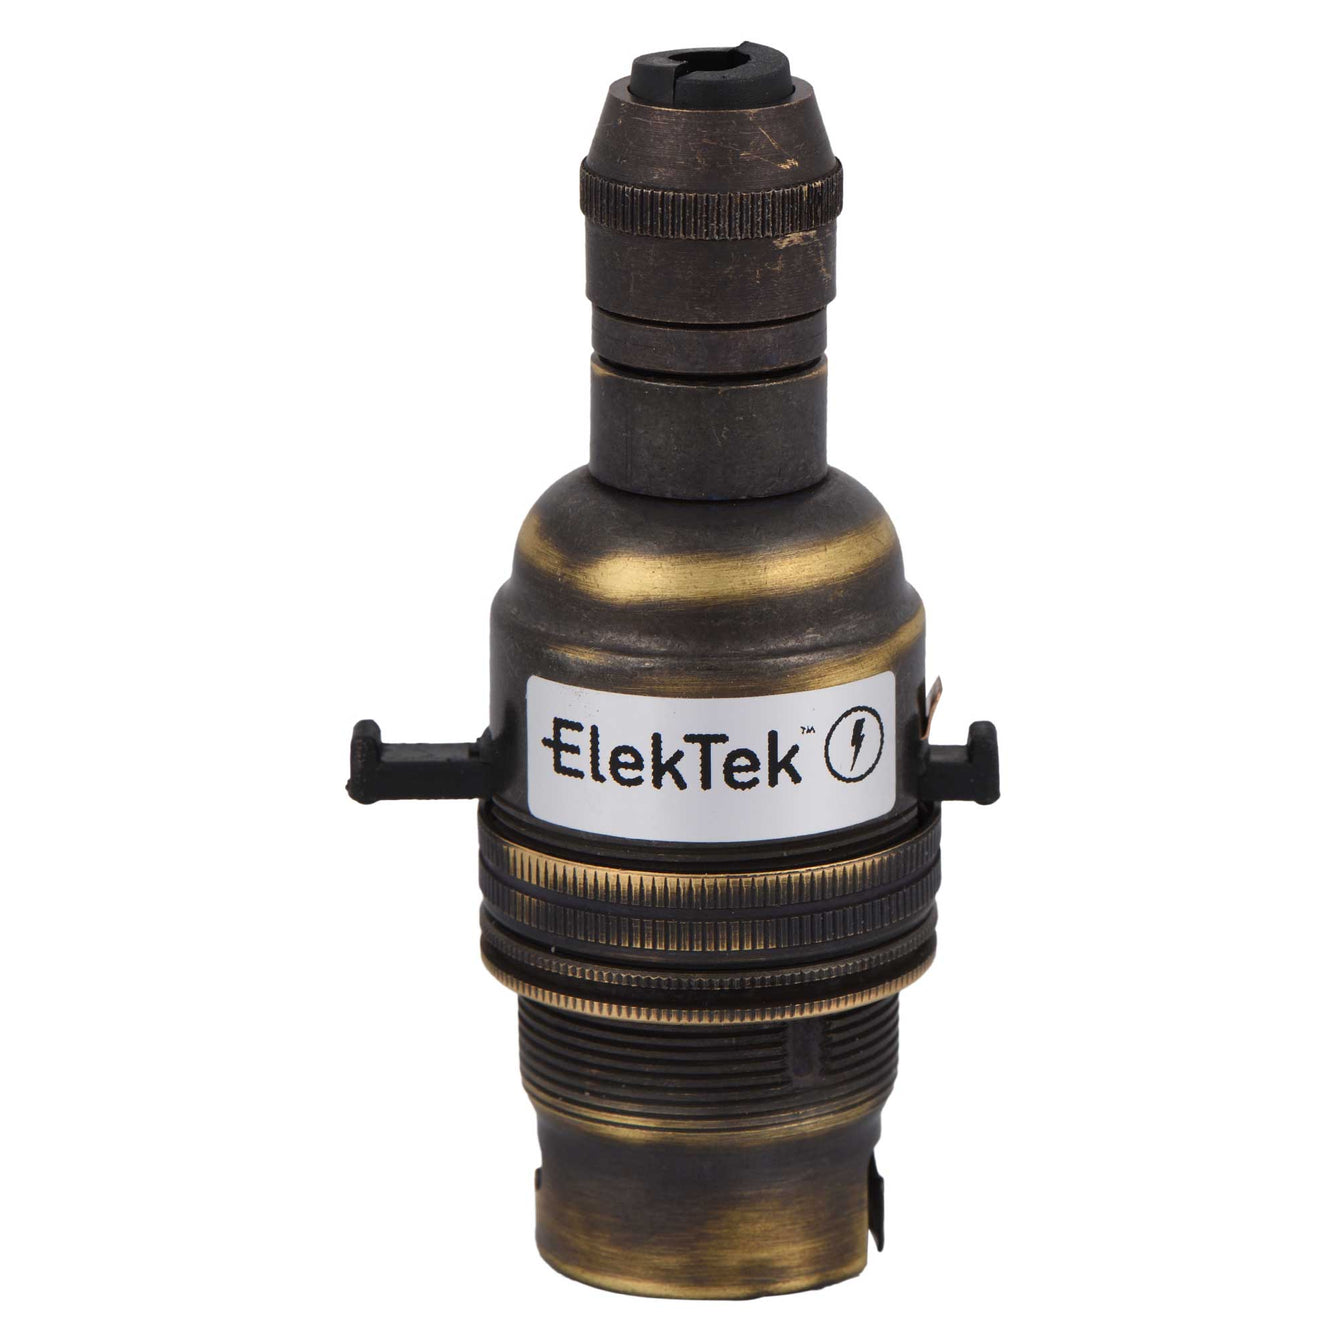 ElekTek Safety Switch Lamp Holder Half Inch Bayonet Cap B22 With Matching Cable Cord Grip Brass 